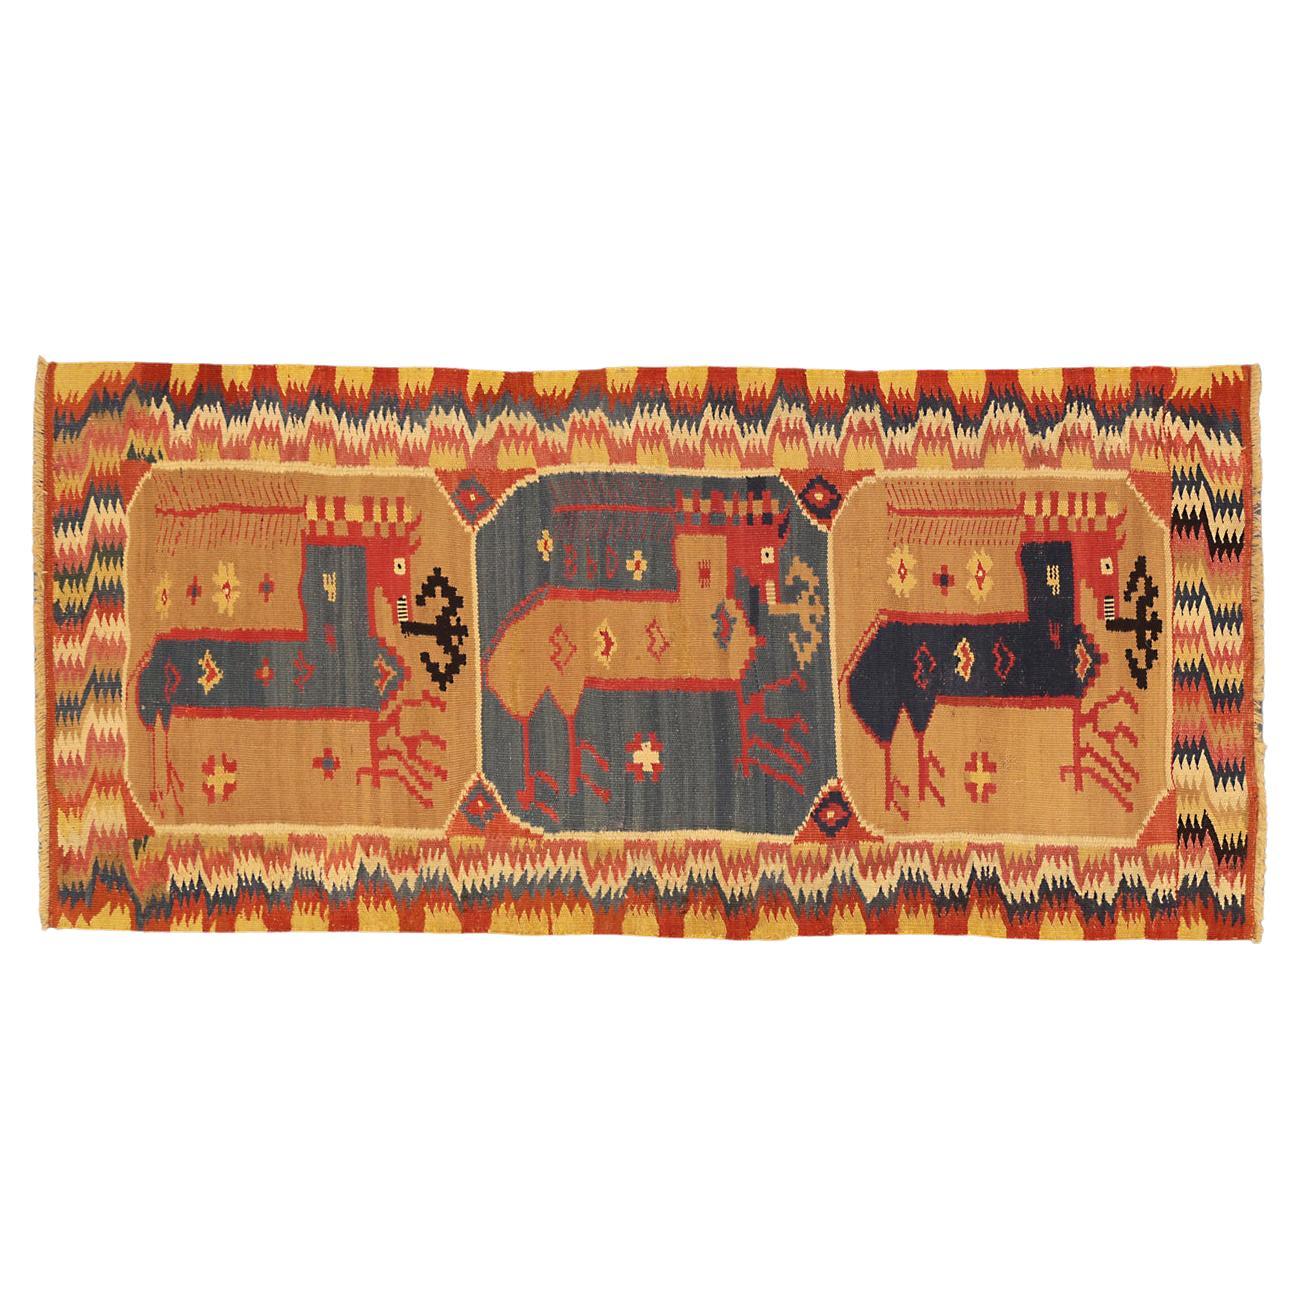 This is an antique European Swedish textile woven during the 19th century and measures 97 x 47CM in size. It has a horizontal format with three enclosed horse motifs set on alternating beige and blue background colors. This textile has been woven